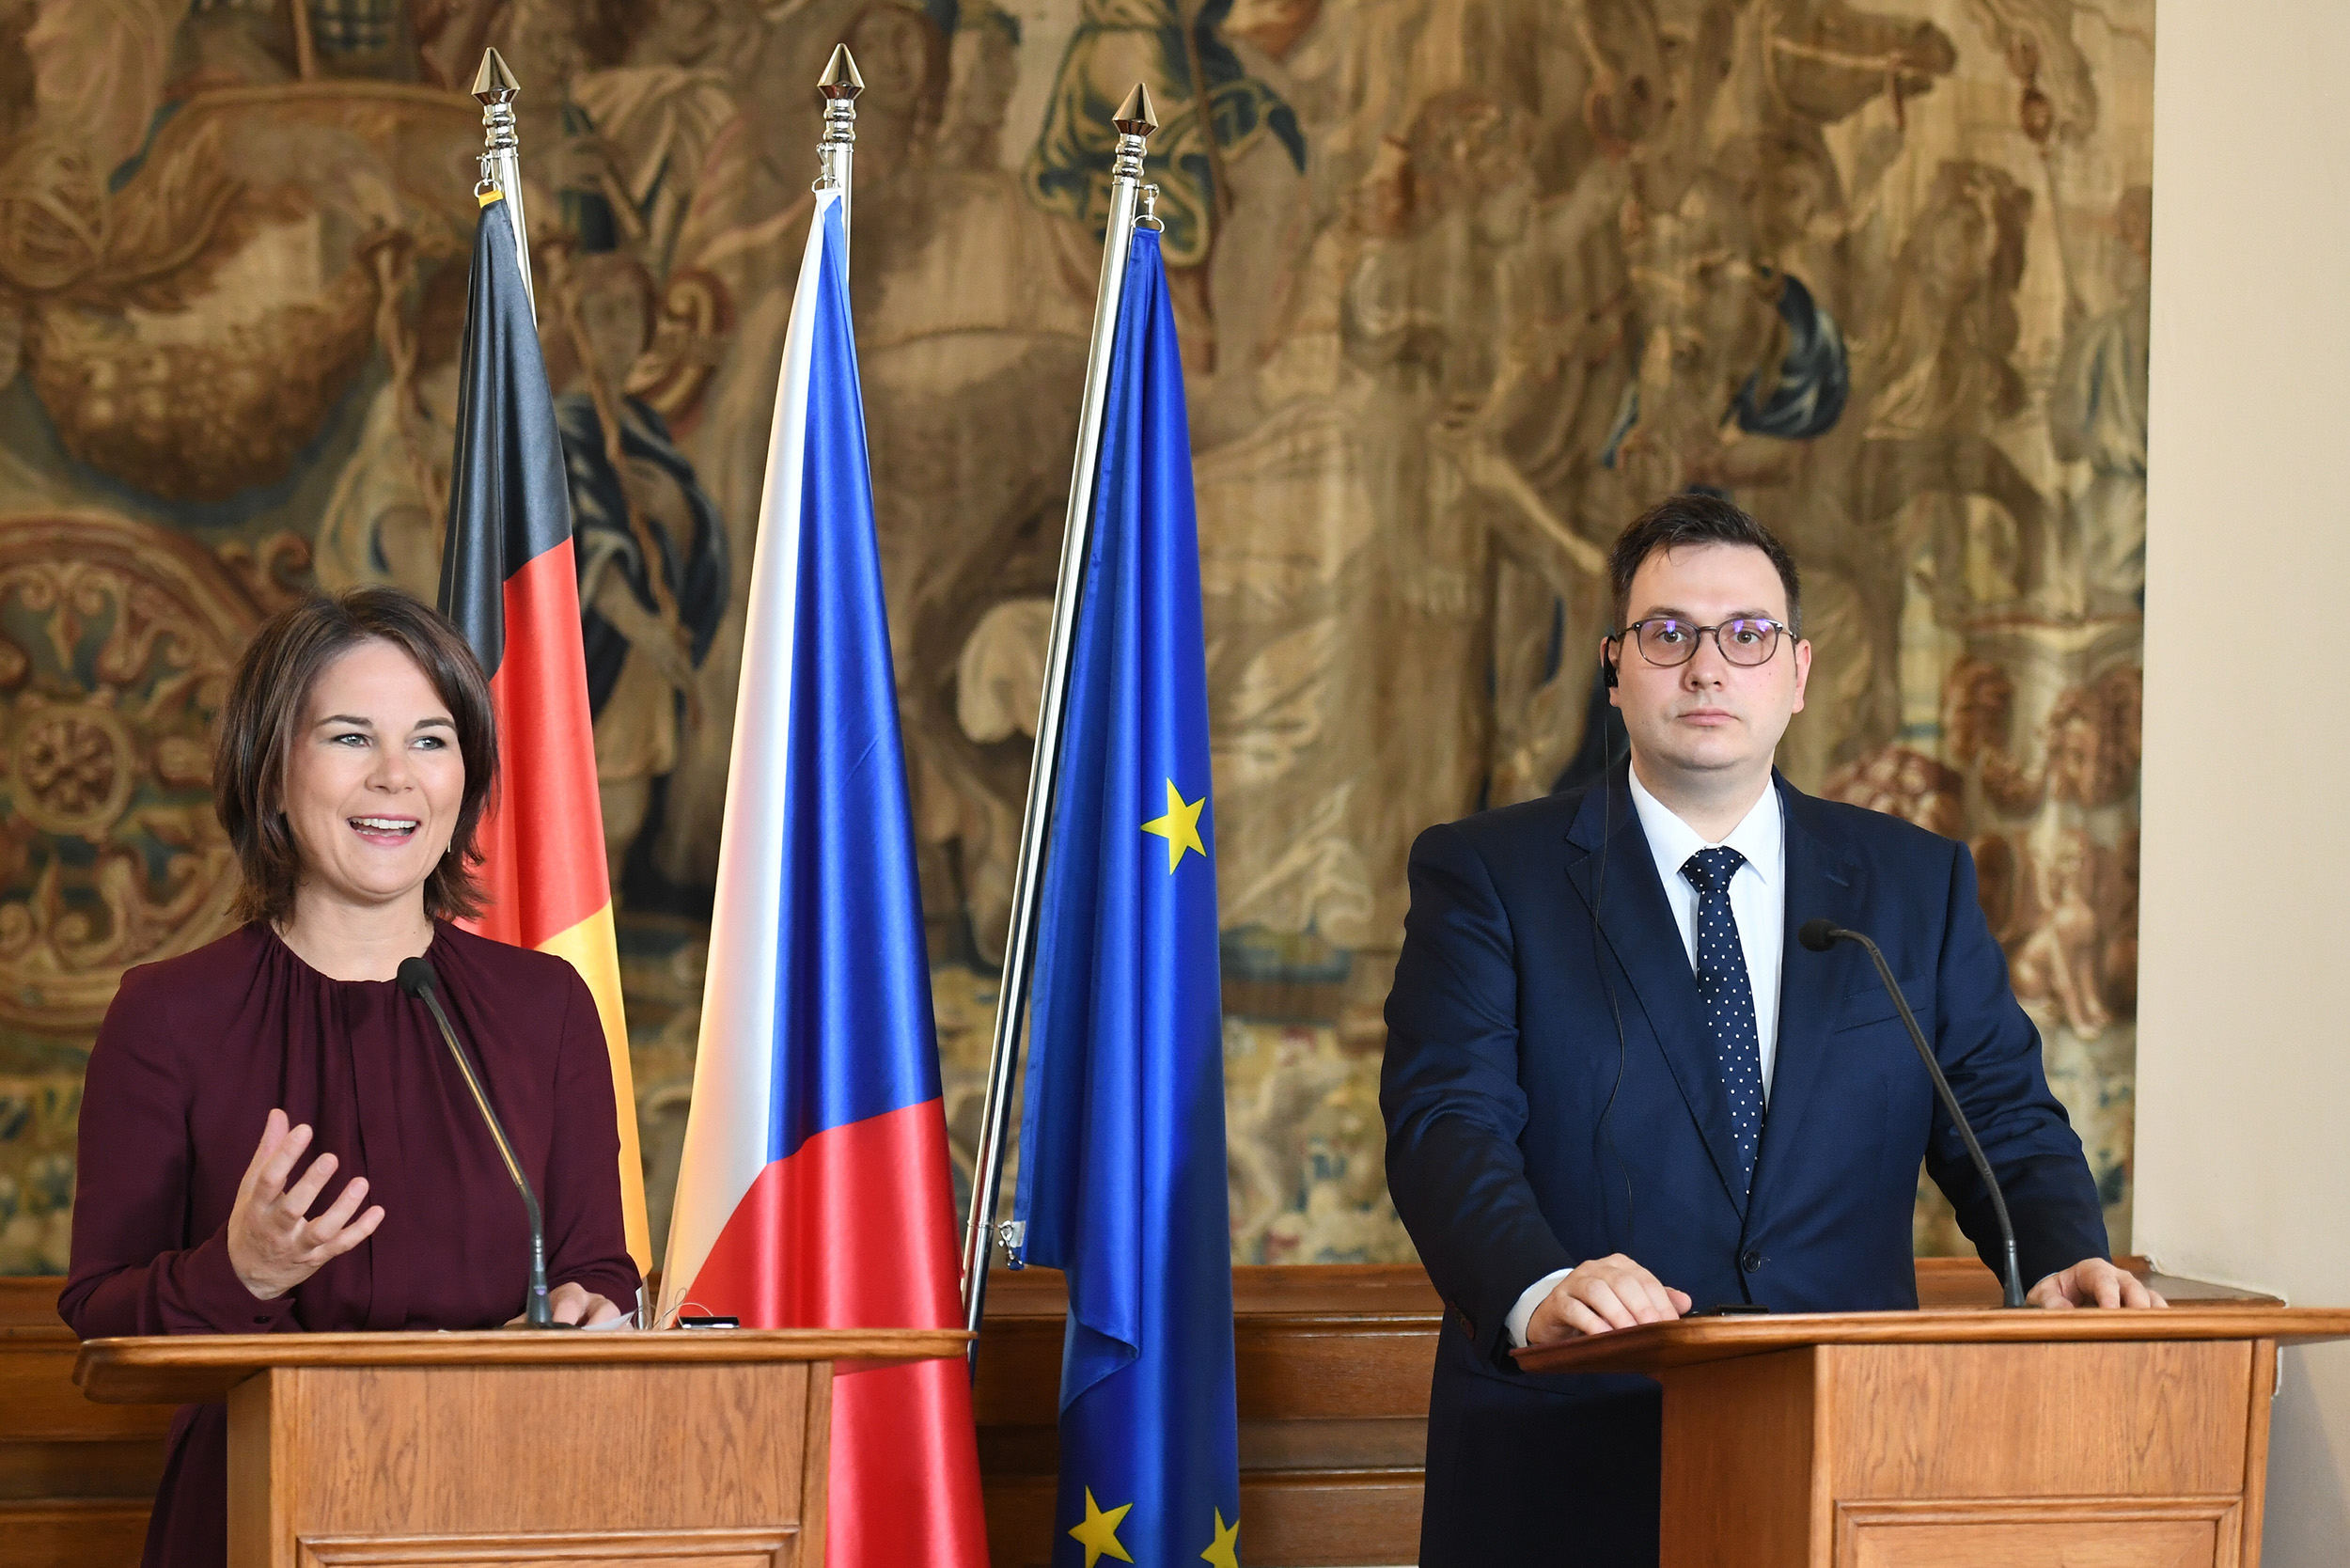 German Minister of Foreign Affairs Annalena Baerbock, left, and her Czech counterpart Jan Lipavsky speak during a press conference, on July 26, in Prague, Czech Republic.